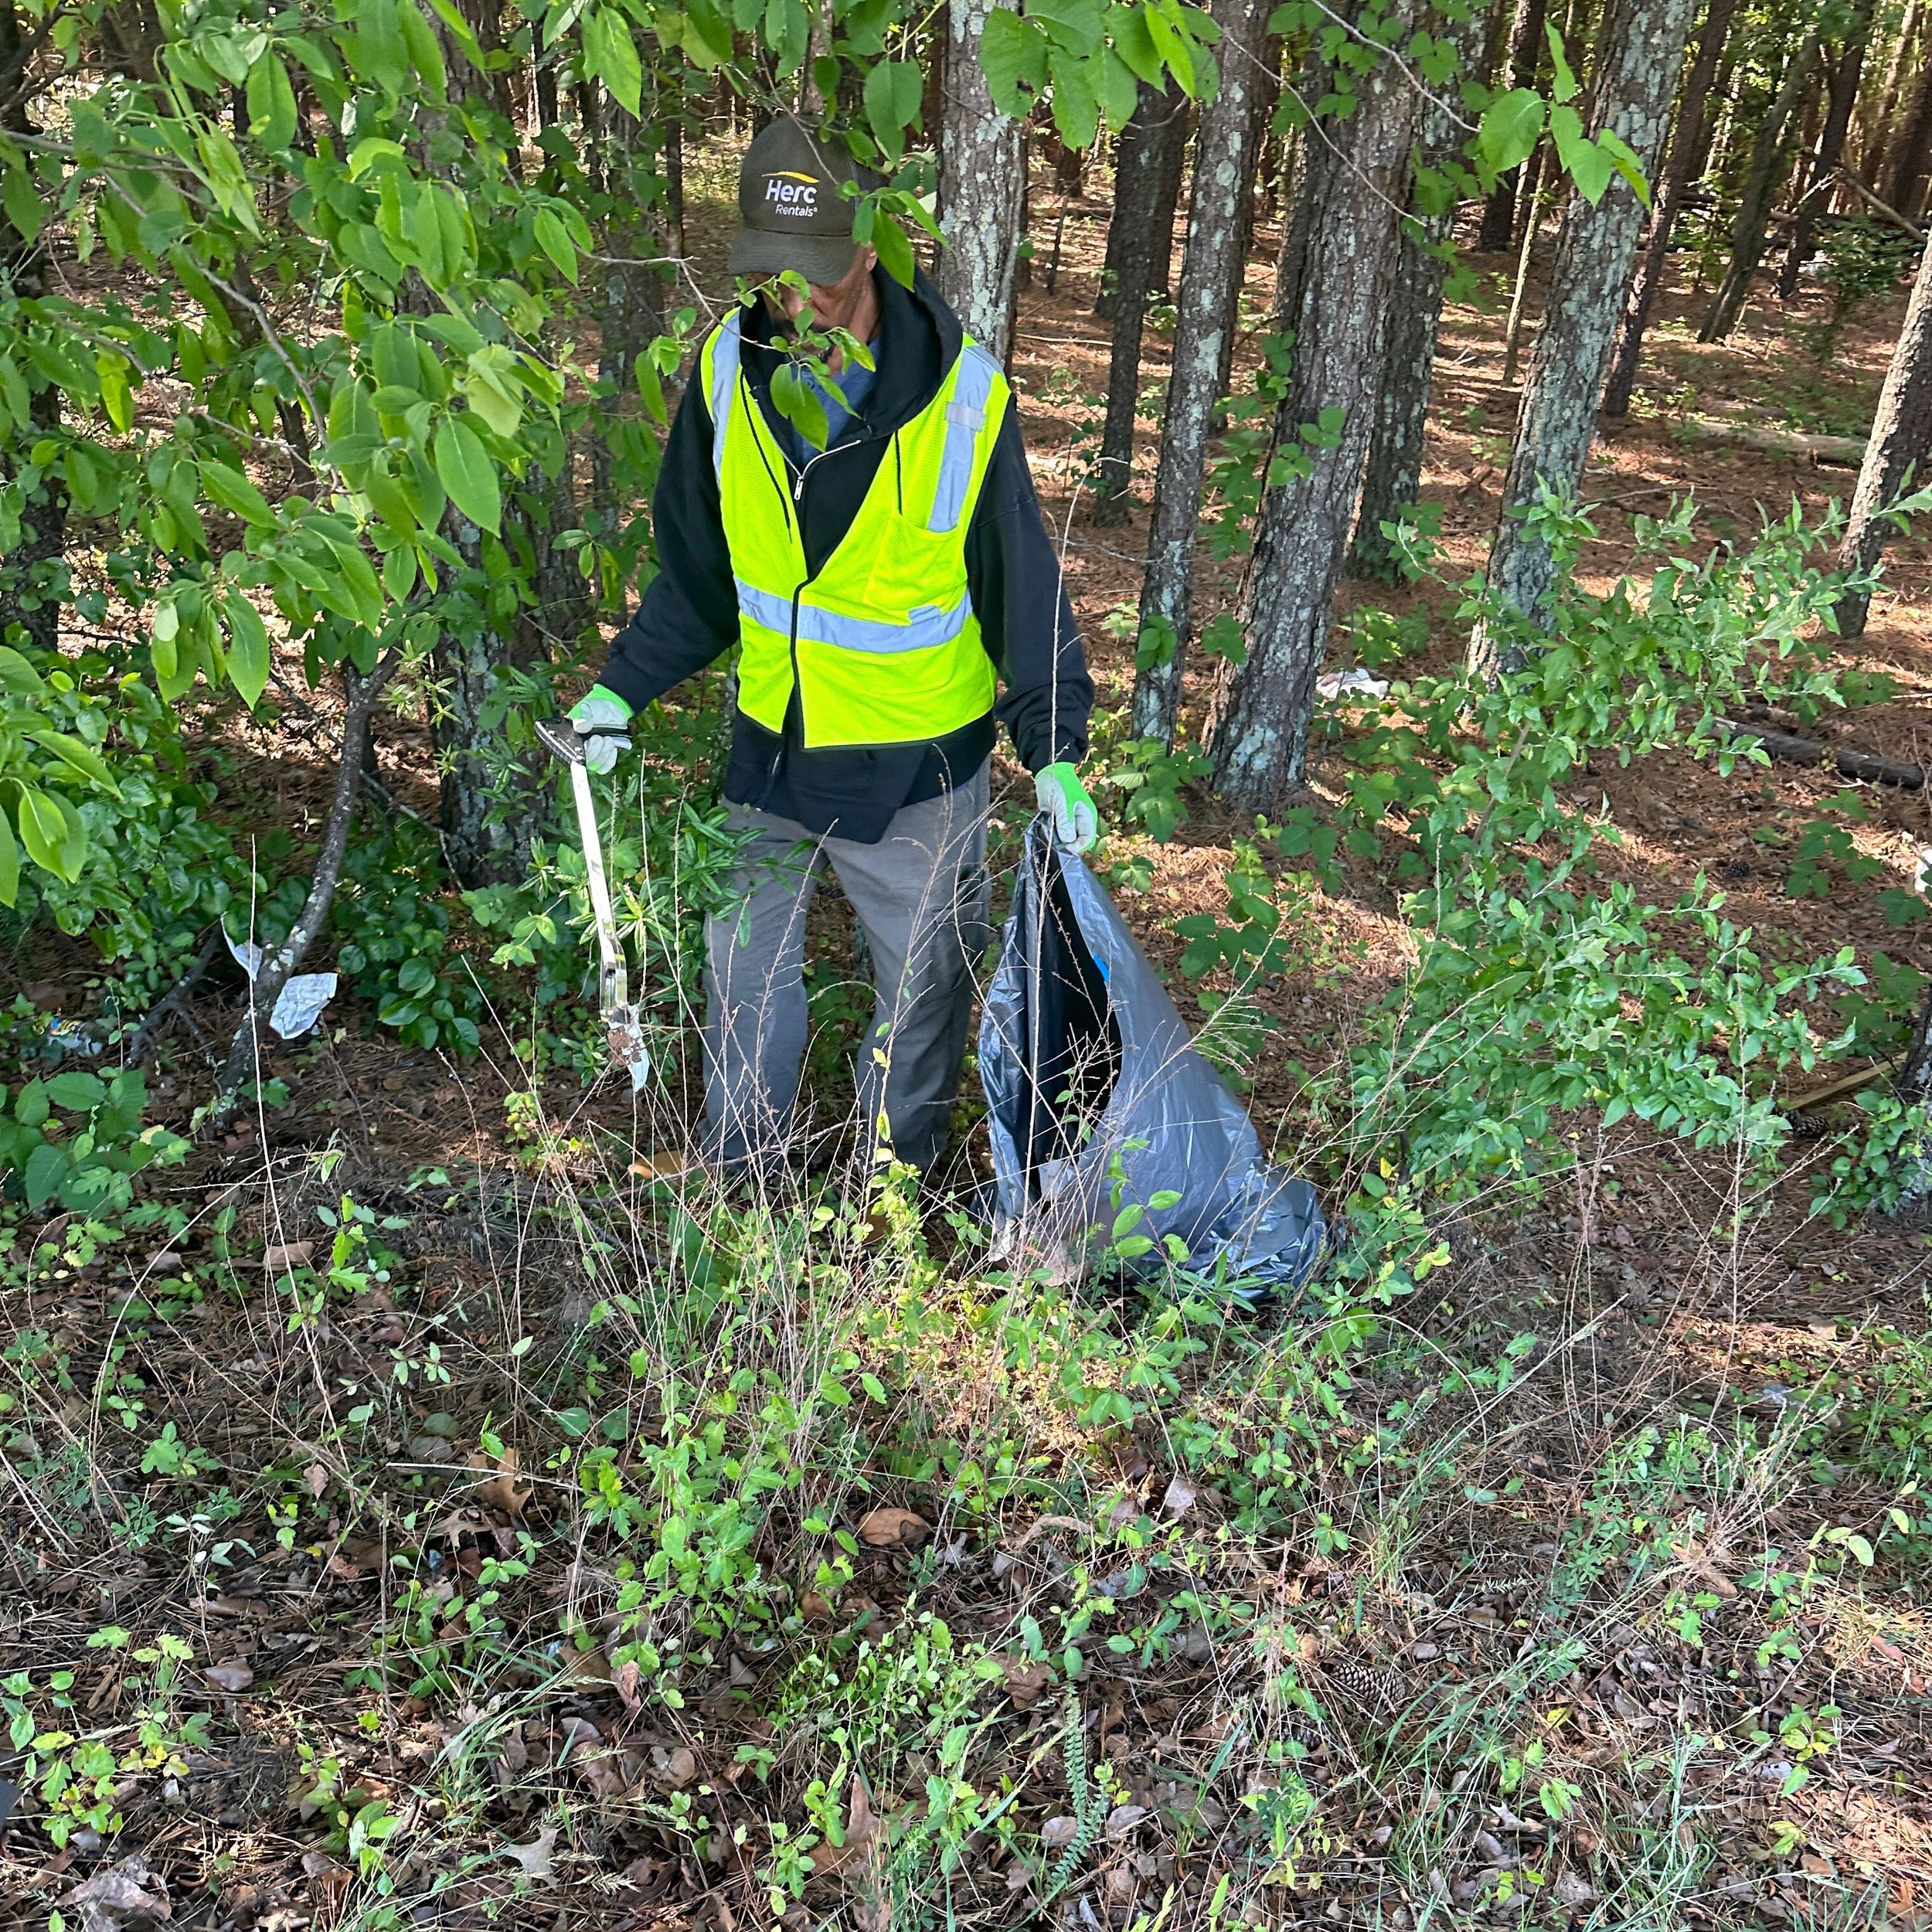 i&rsquo;ll try to keep a long story short on this W&oslash;rkforce Wednesday.

we had a new guy join the workforce recently. fantastic human and a super hard worker. Driving to our cleanup location, he just kept mentioning how much he needed and appr